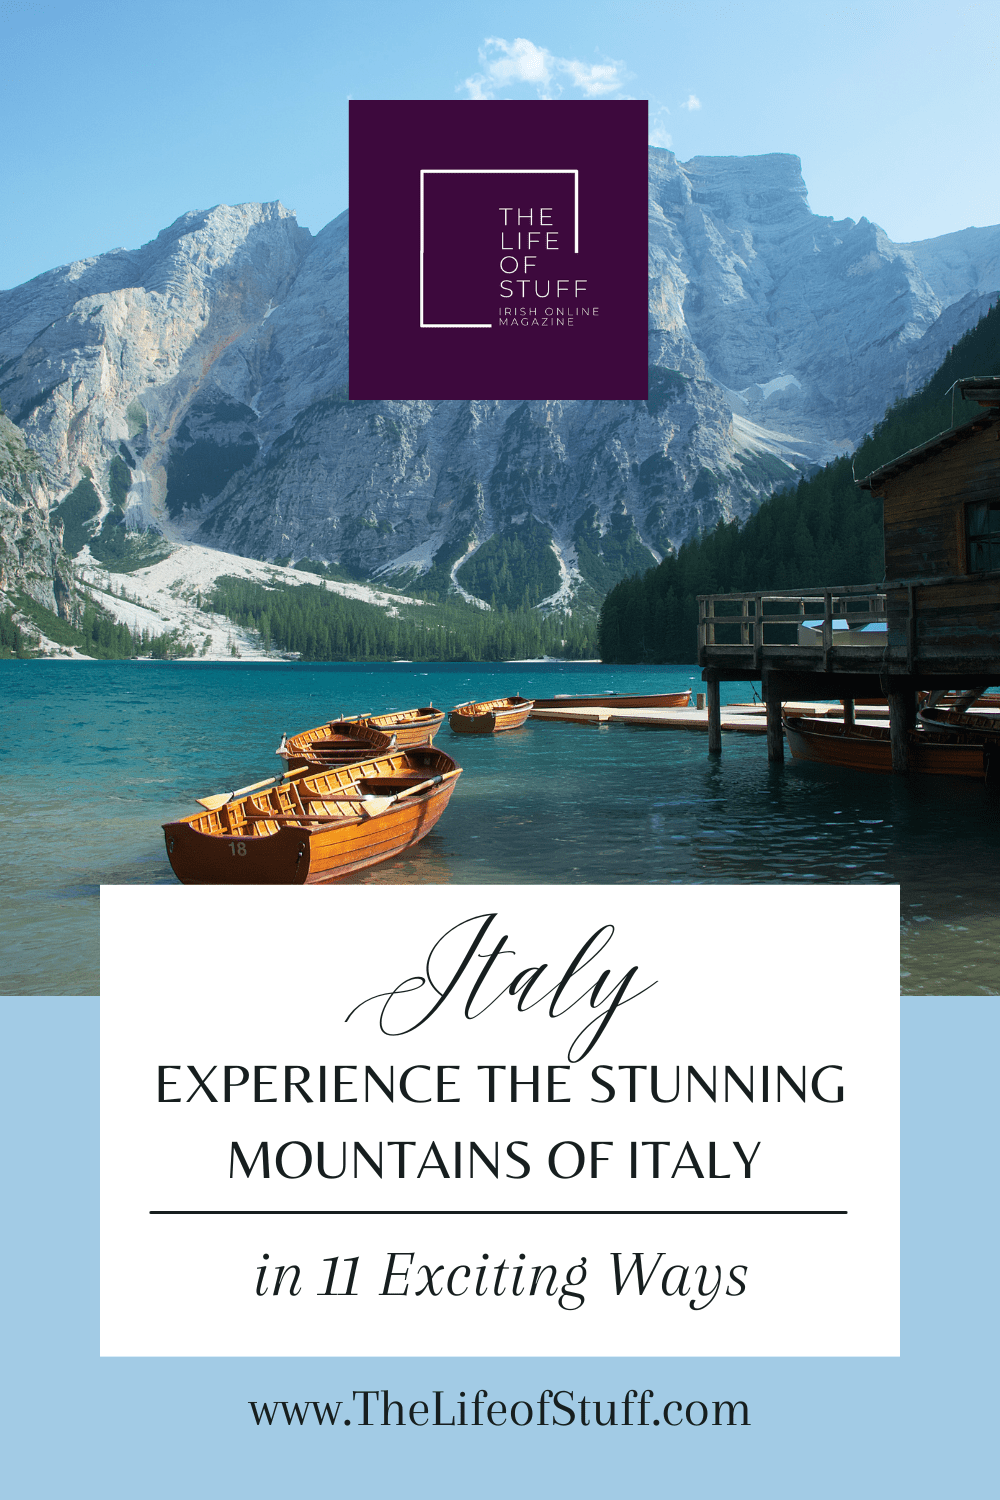 Experience the Stunning Mountains of Italy in 11 Exciting Ways on The Life of Stuff